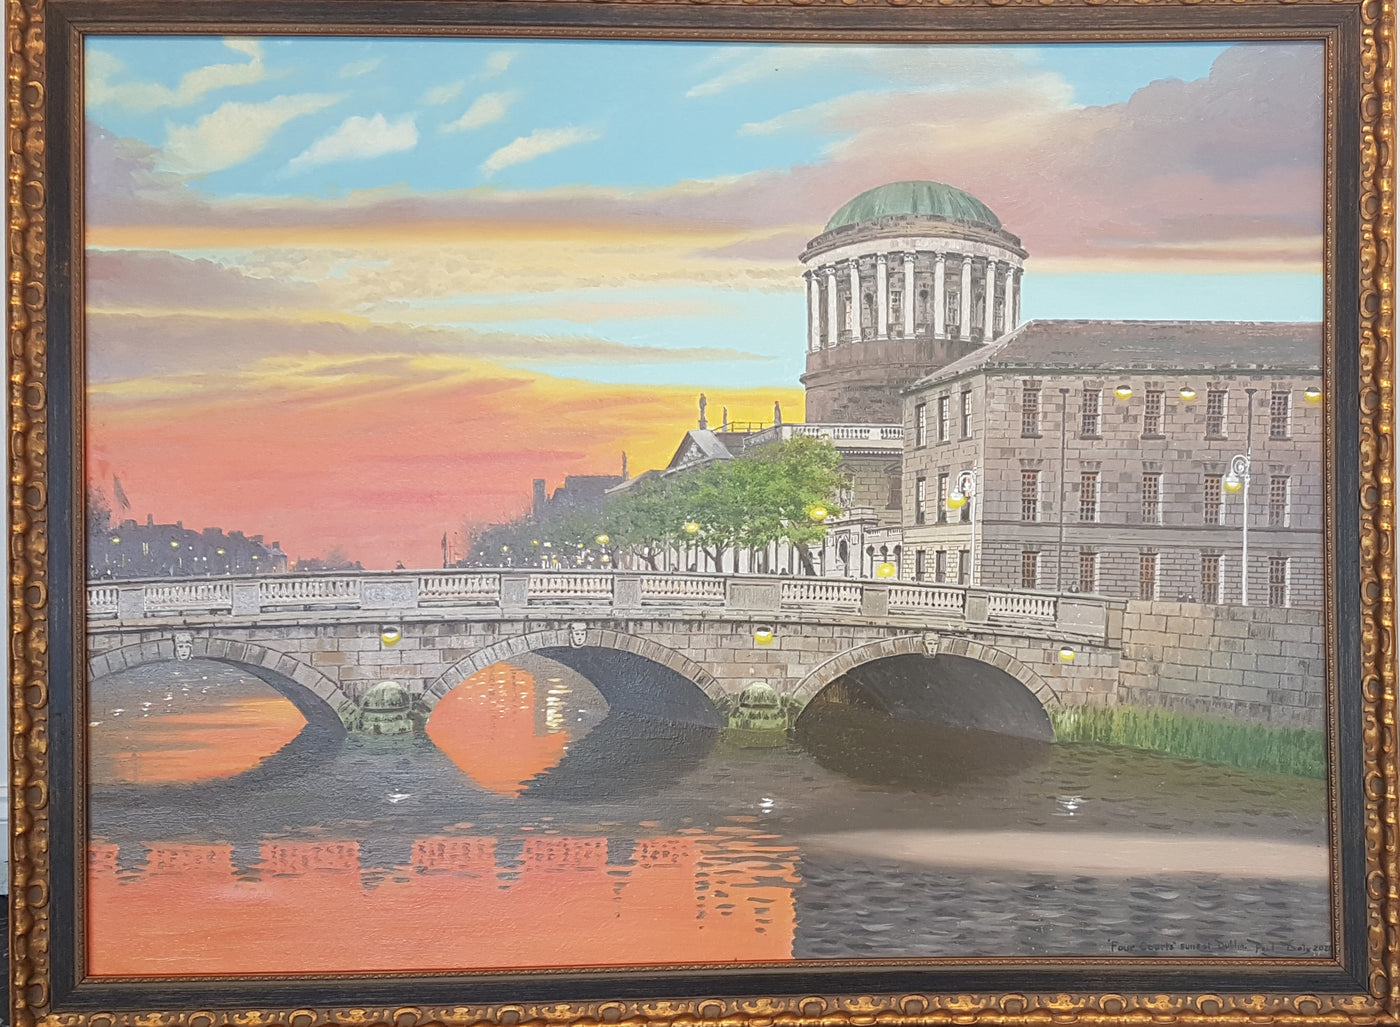 The Four Courts At Sunset